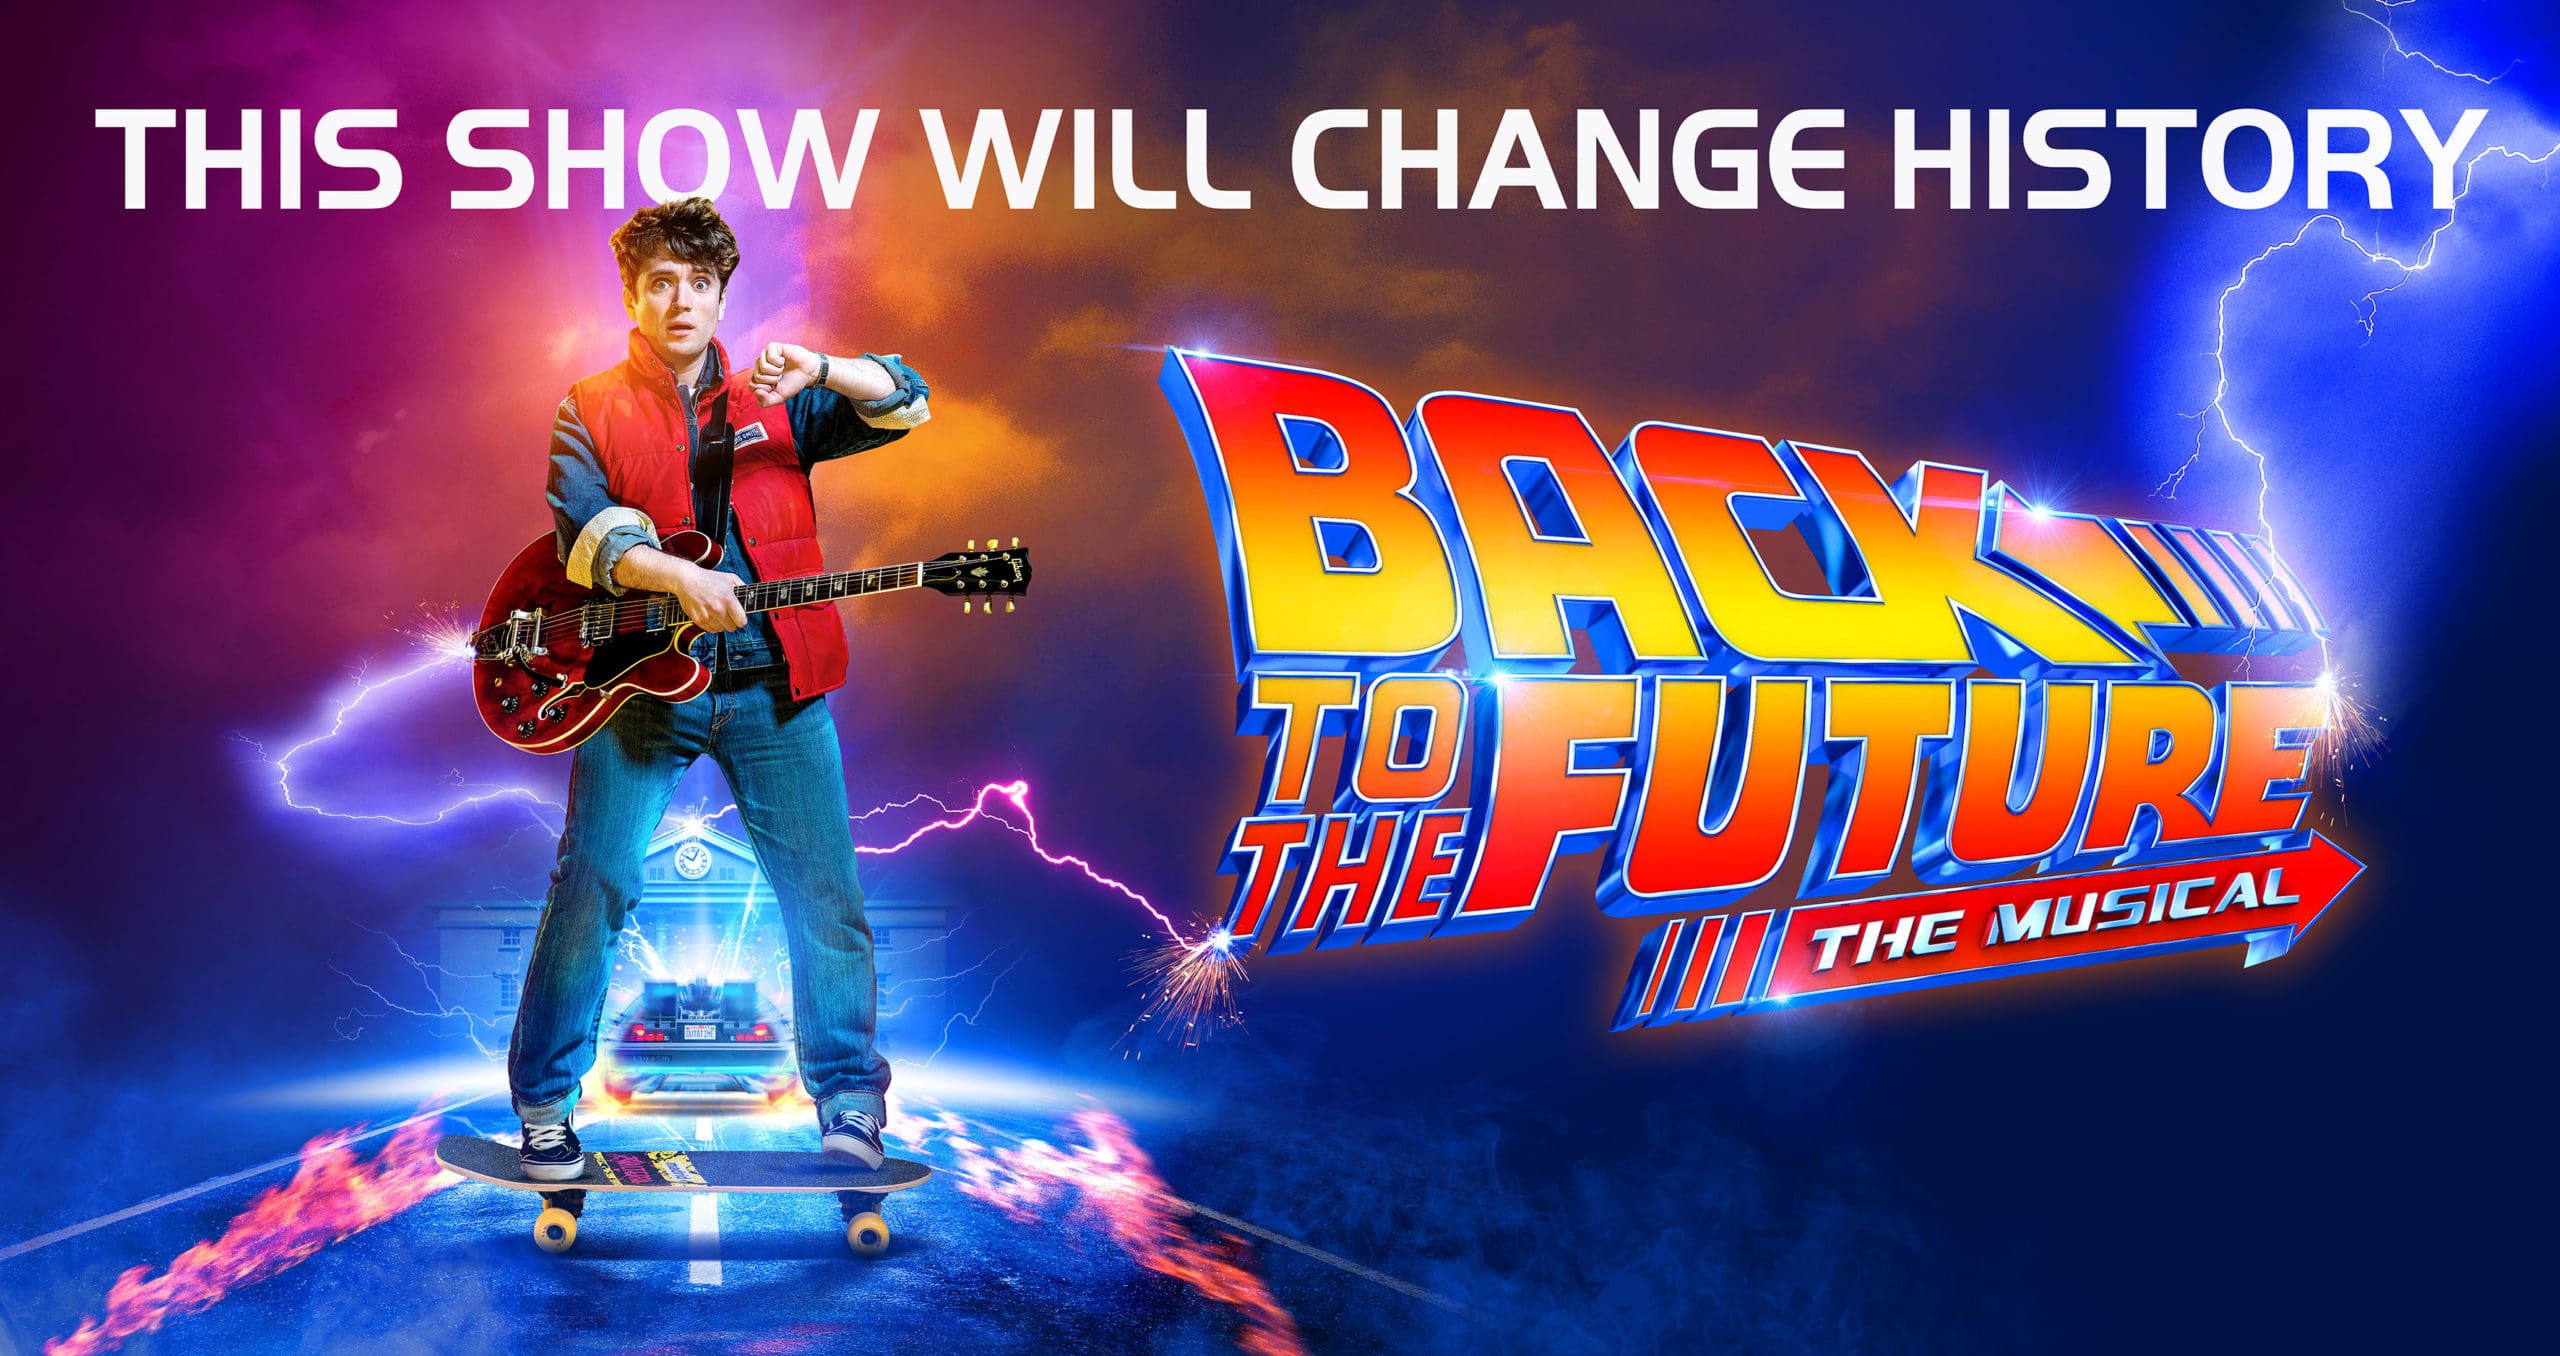 NEWS: Full casting announced Back to Future the Musical